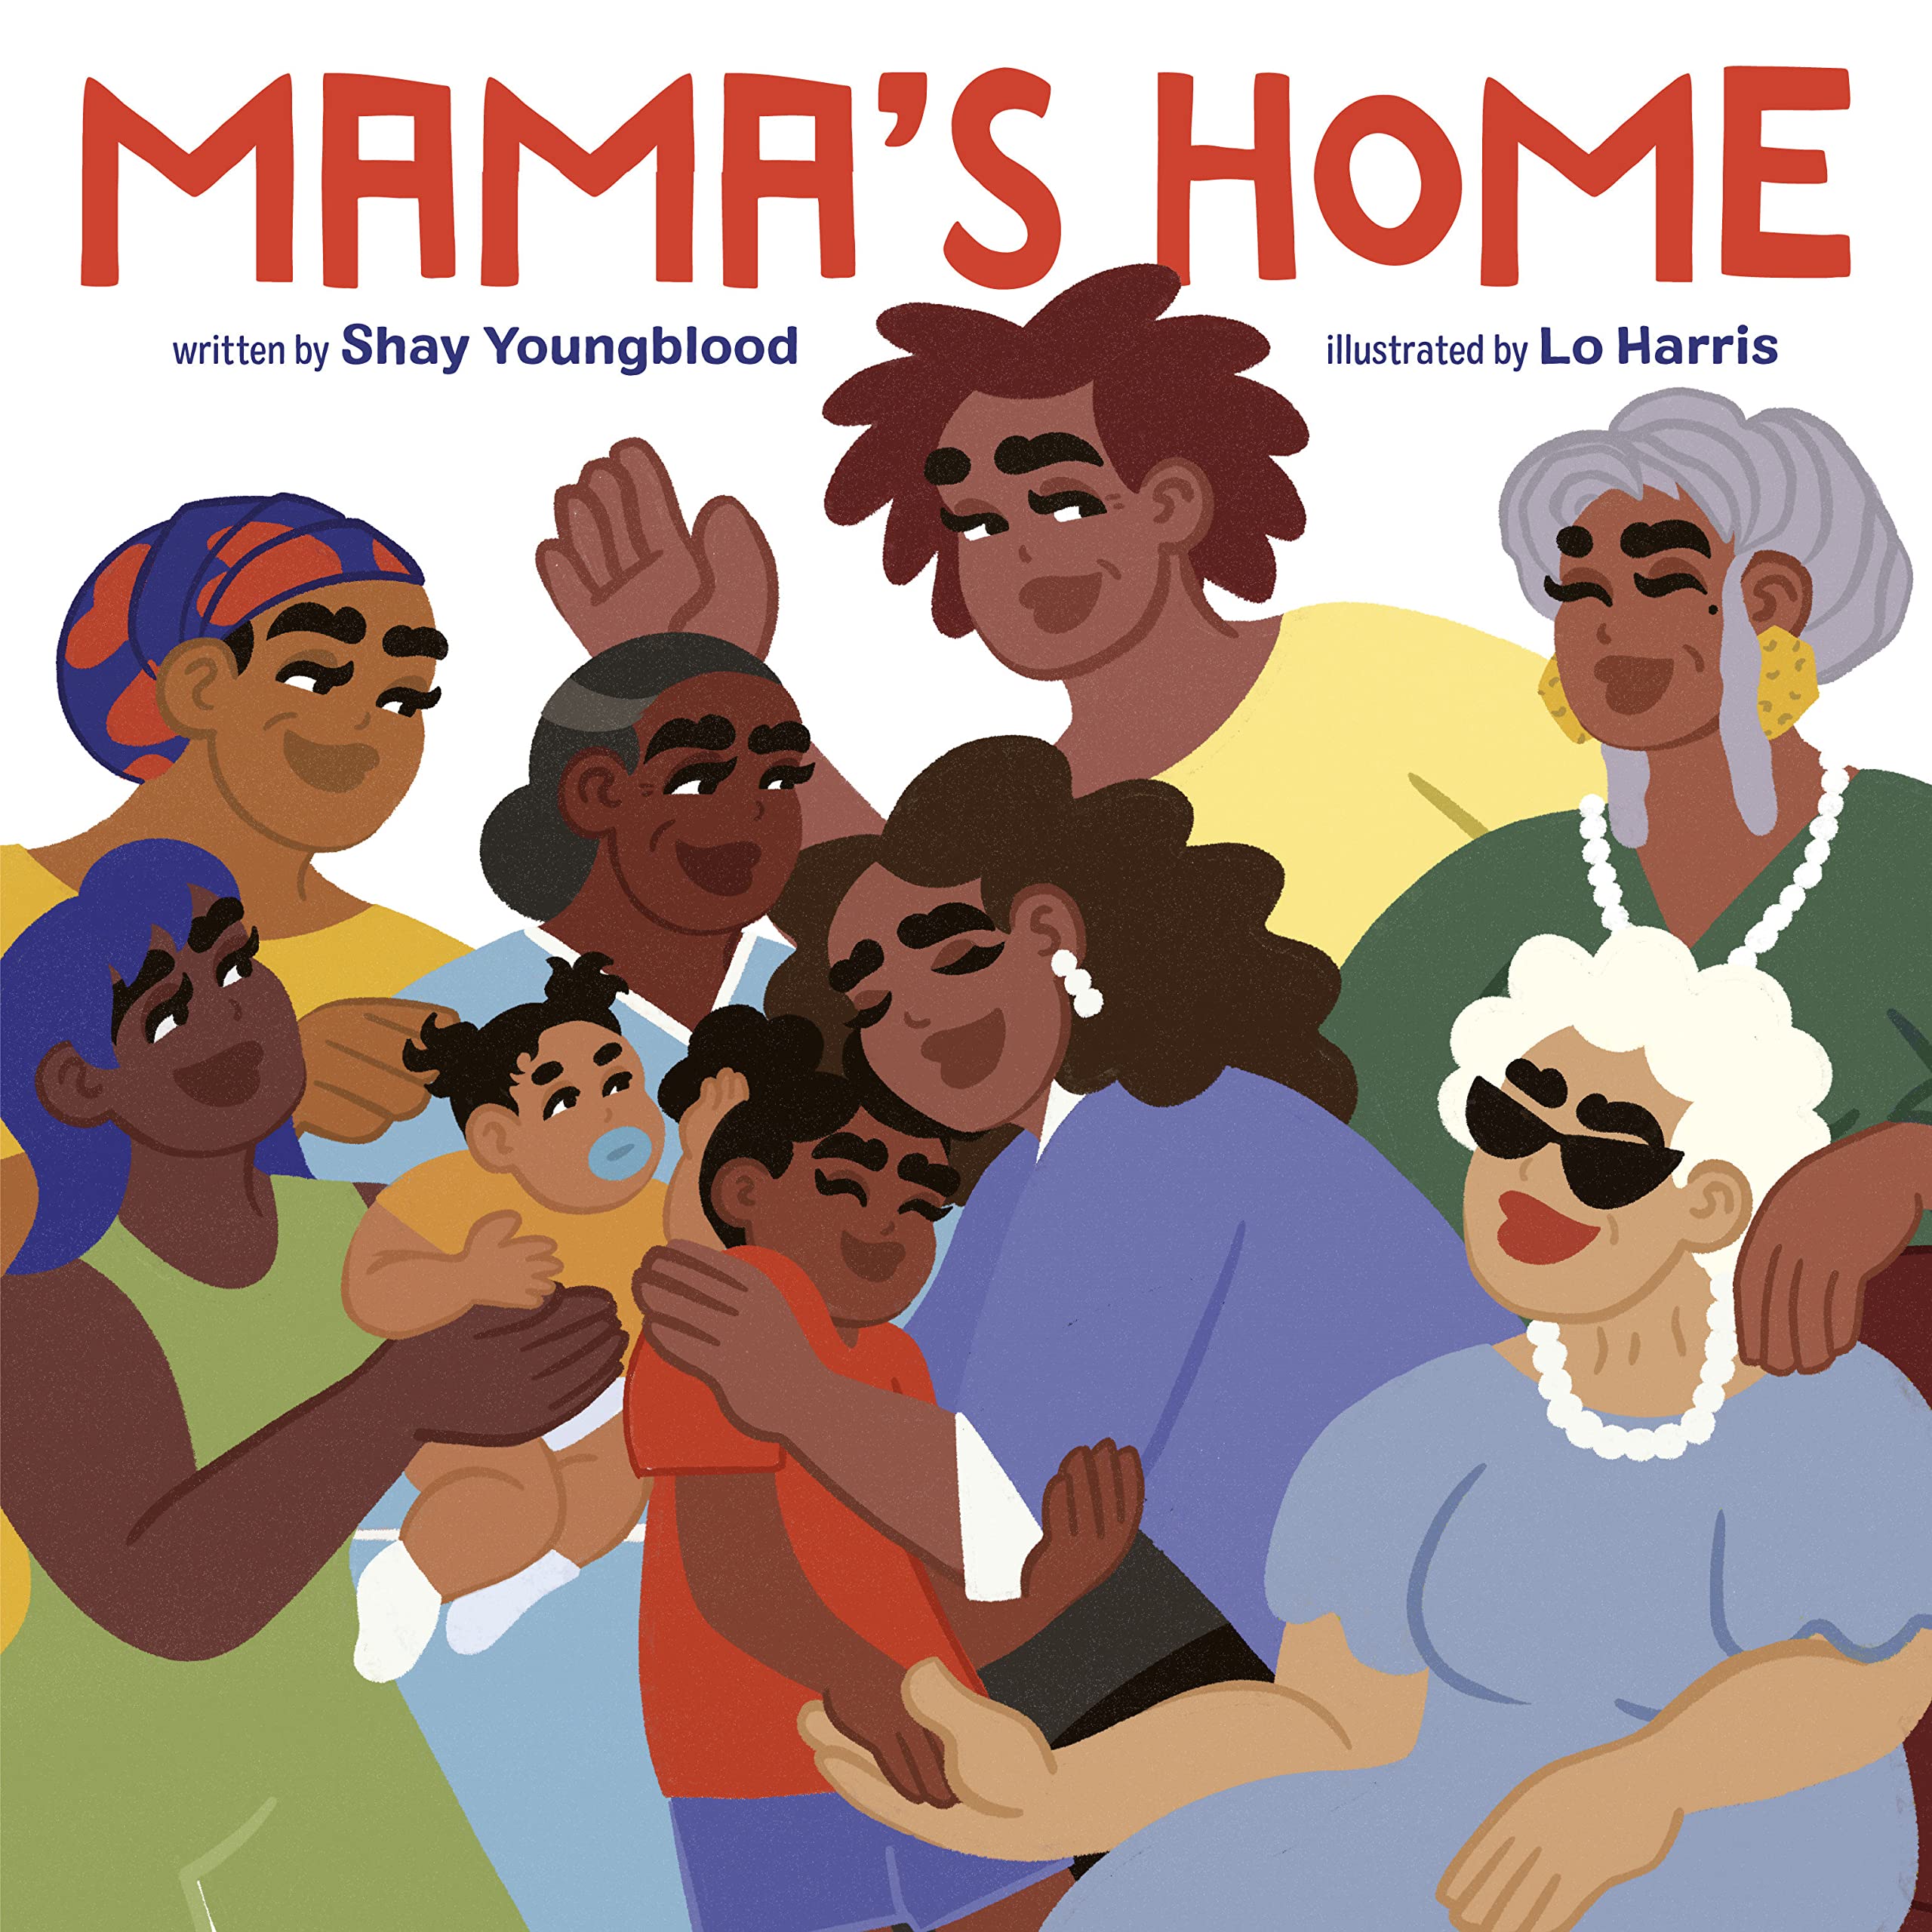 Shay Youngblood: Mama's Home'